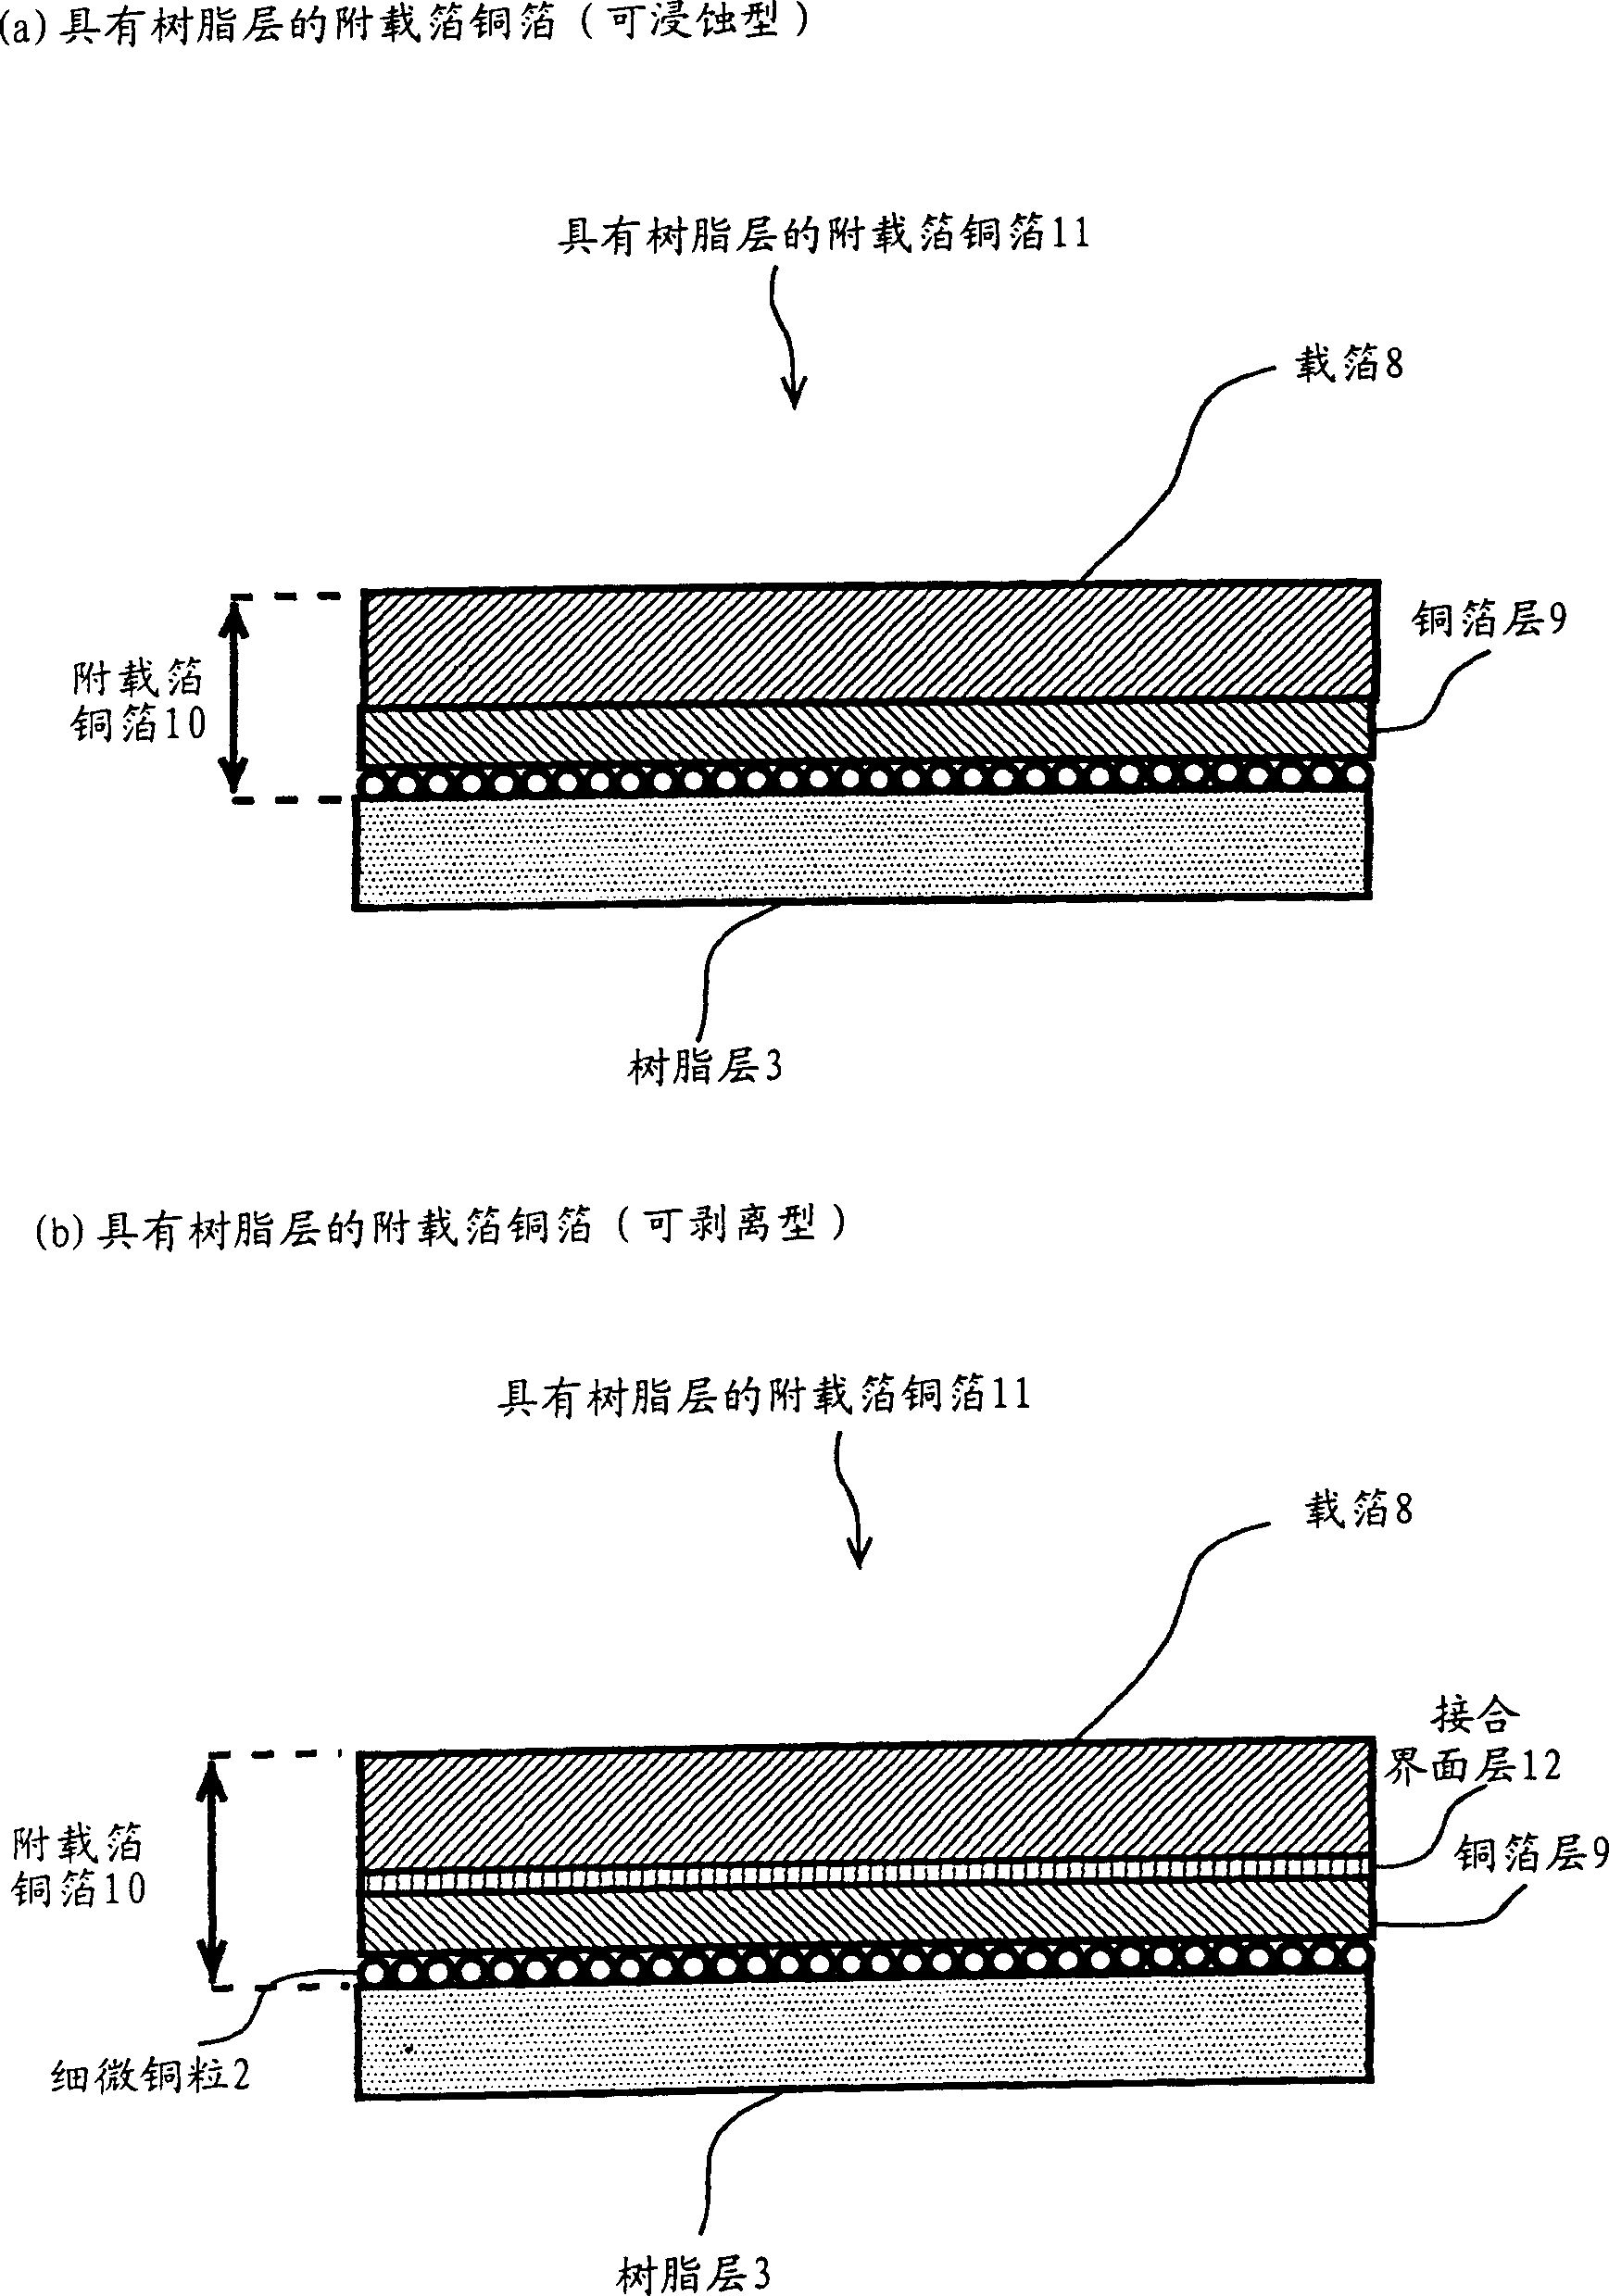 Production method for copper-clad laminated sheet